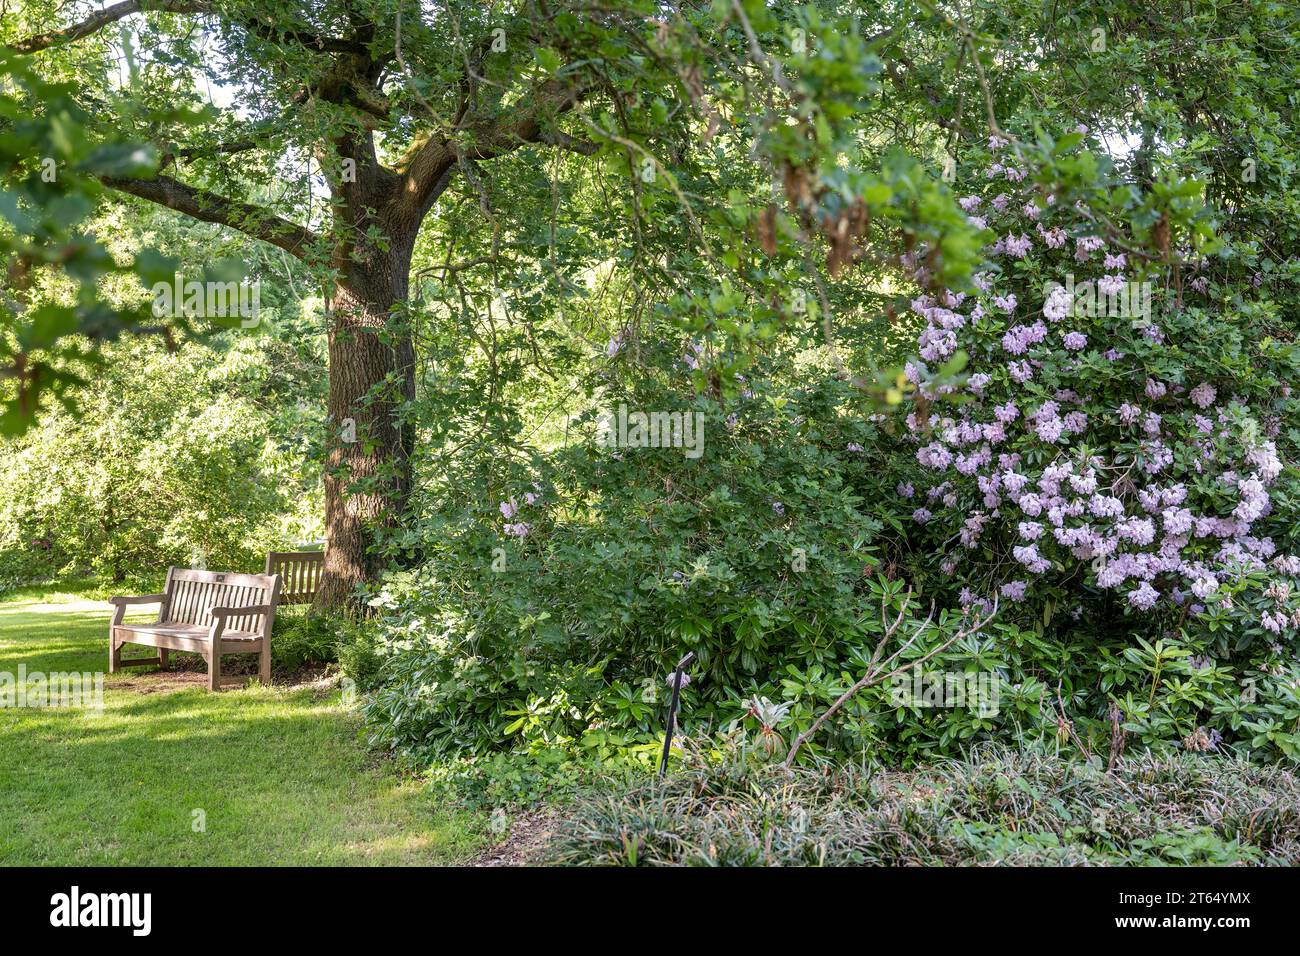 Bench in the park, Rhododendron (Rhododendron Homer), Royal Botanic Gardens, Kew, London, England, Great Britain Stock Photo